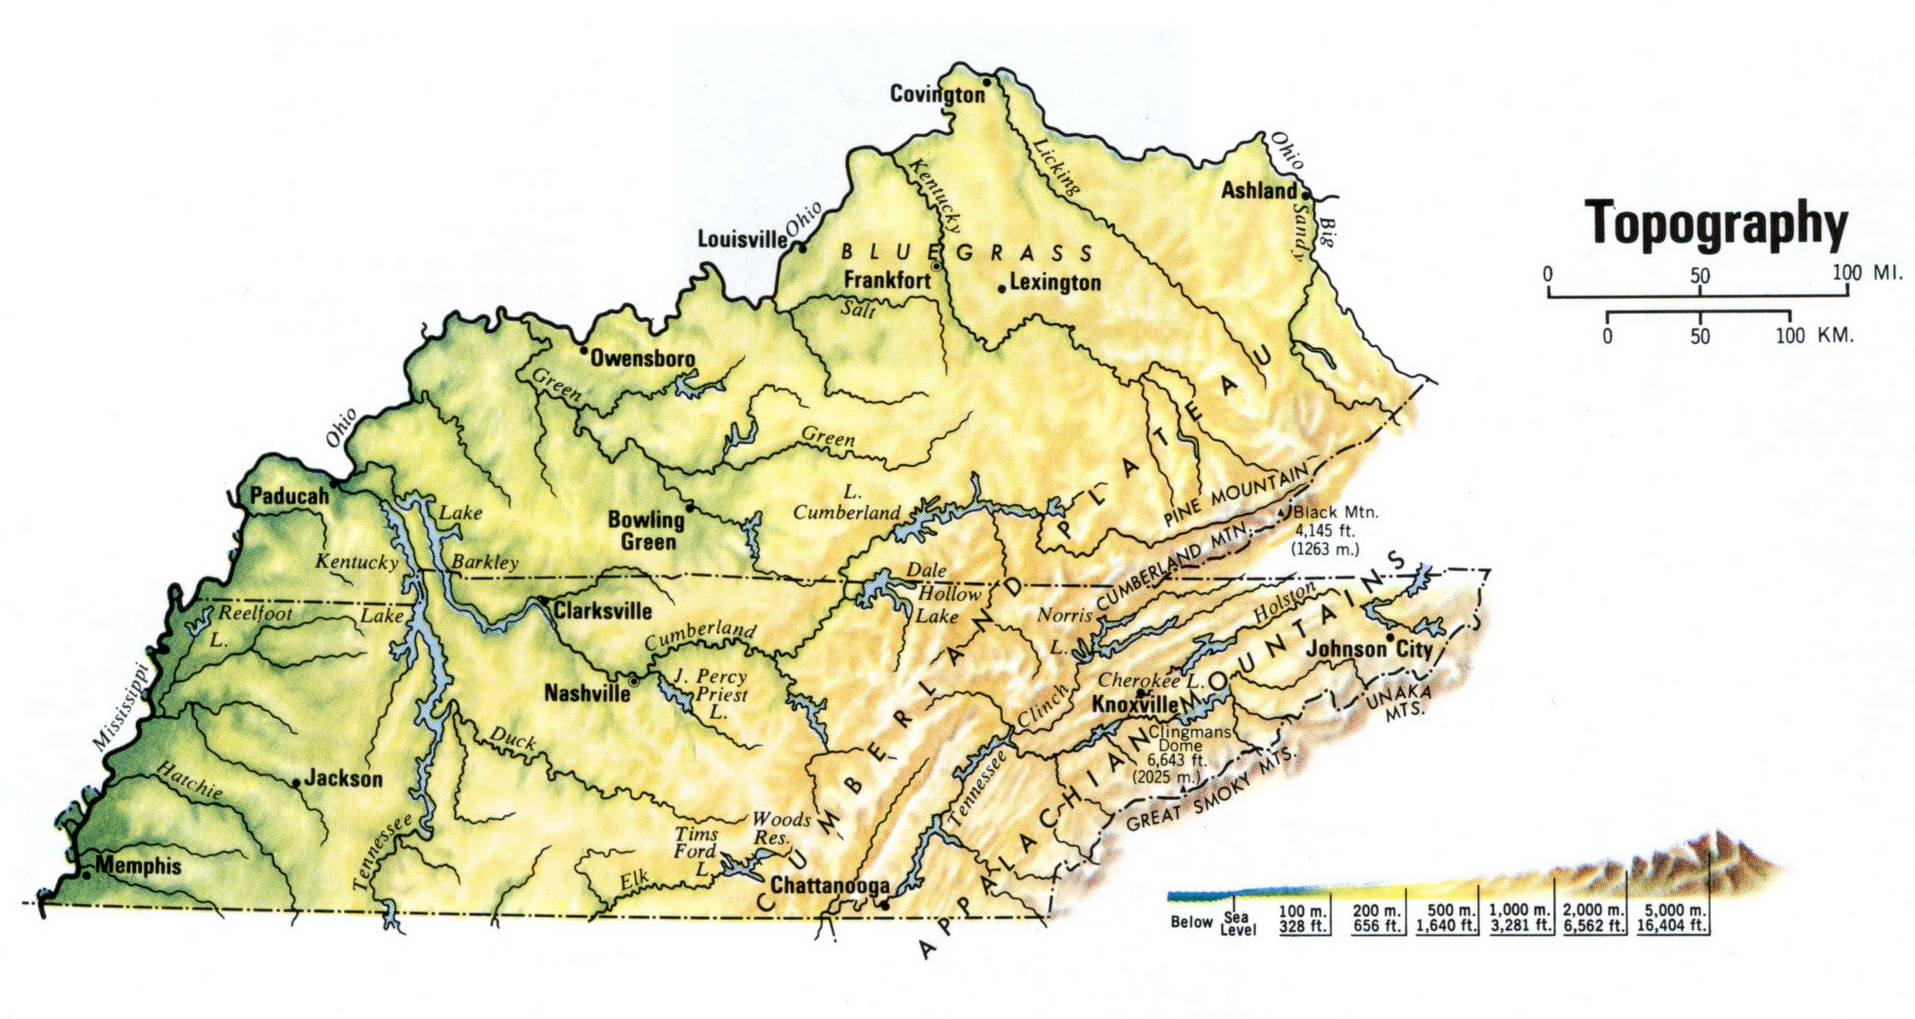 Topography map of Tennessee